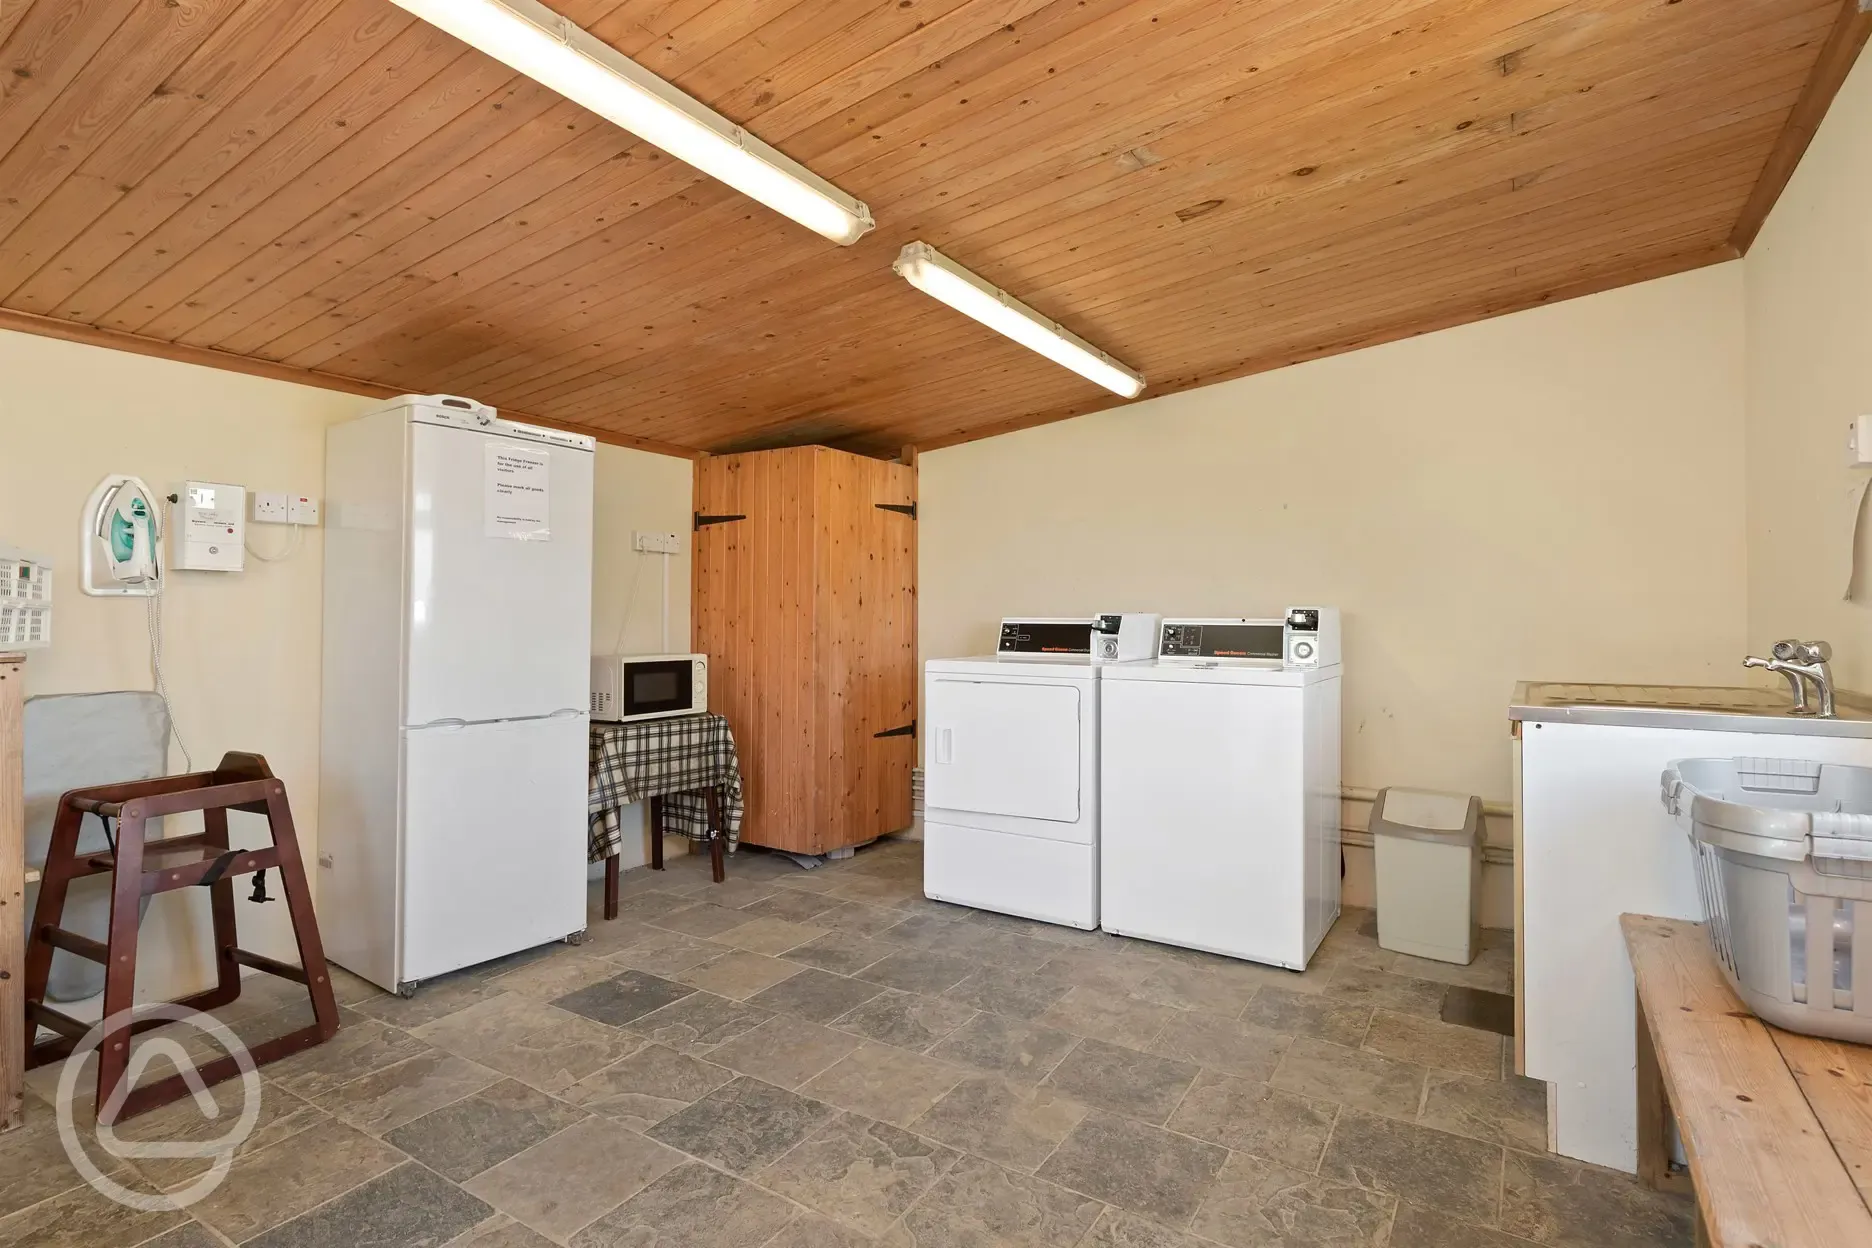 Communal room with laundry, washing up sinks and a fridge